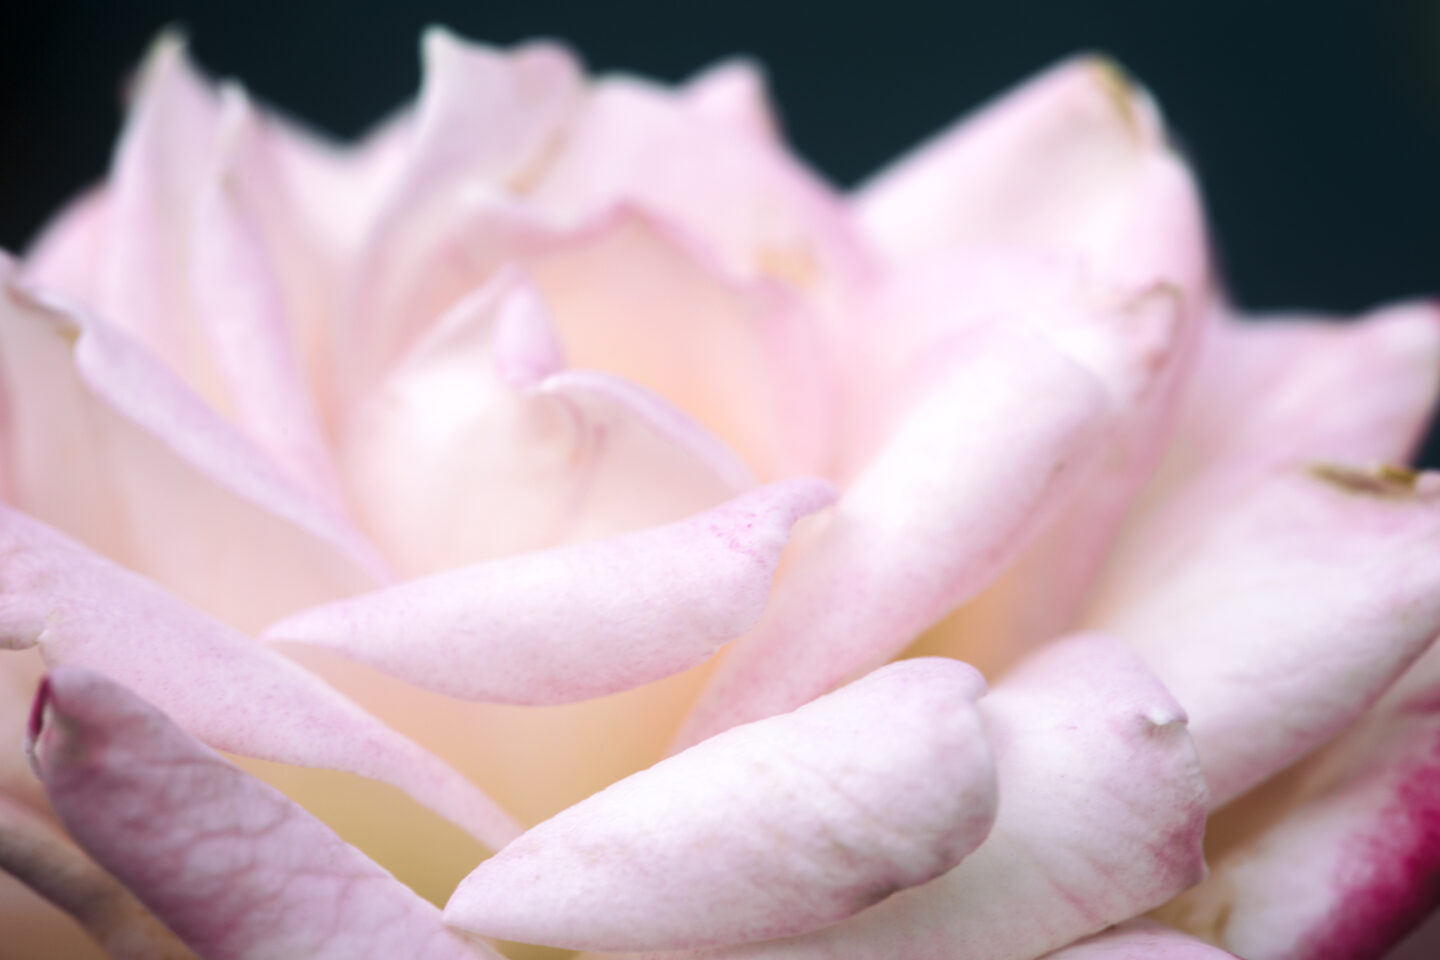 Close up image of a pink rose with a white center, showcased as part of the Happy 25 to the water gardens